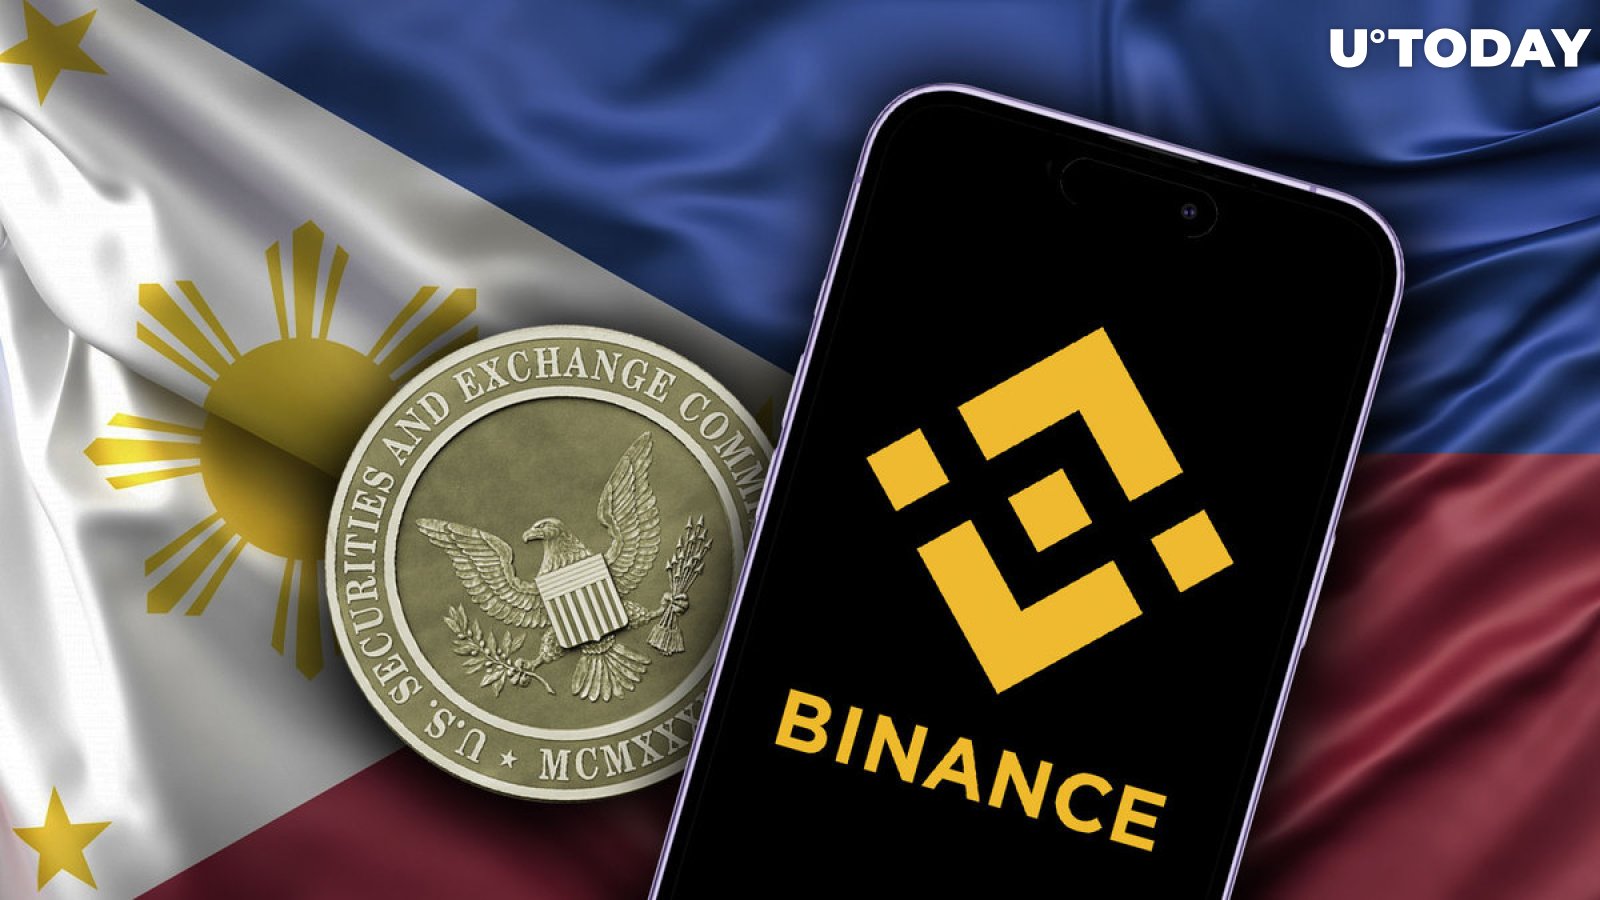 Binance Risks Being Removed From App Stores by Philippines SEC